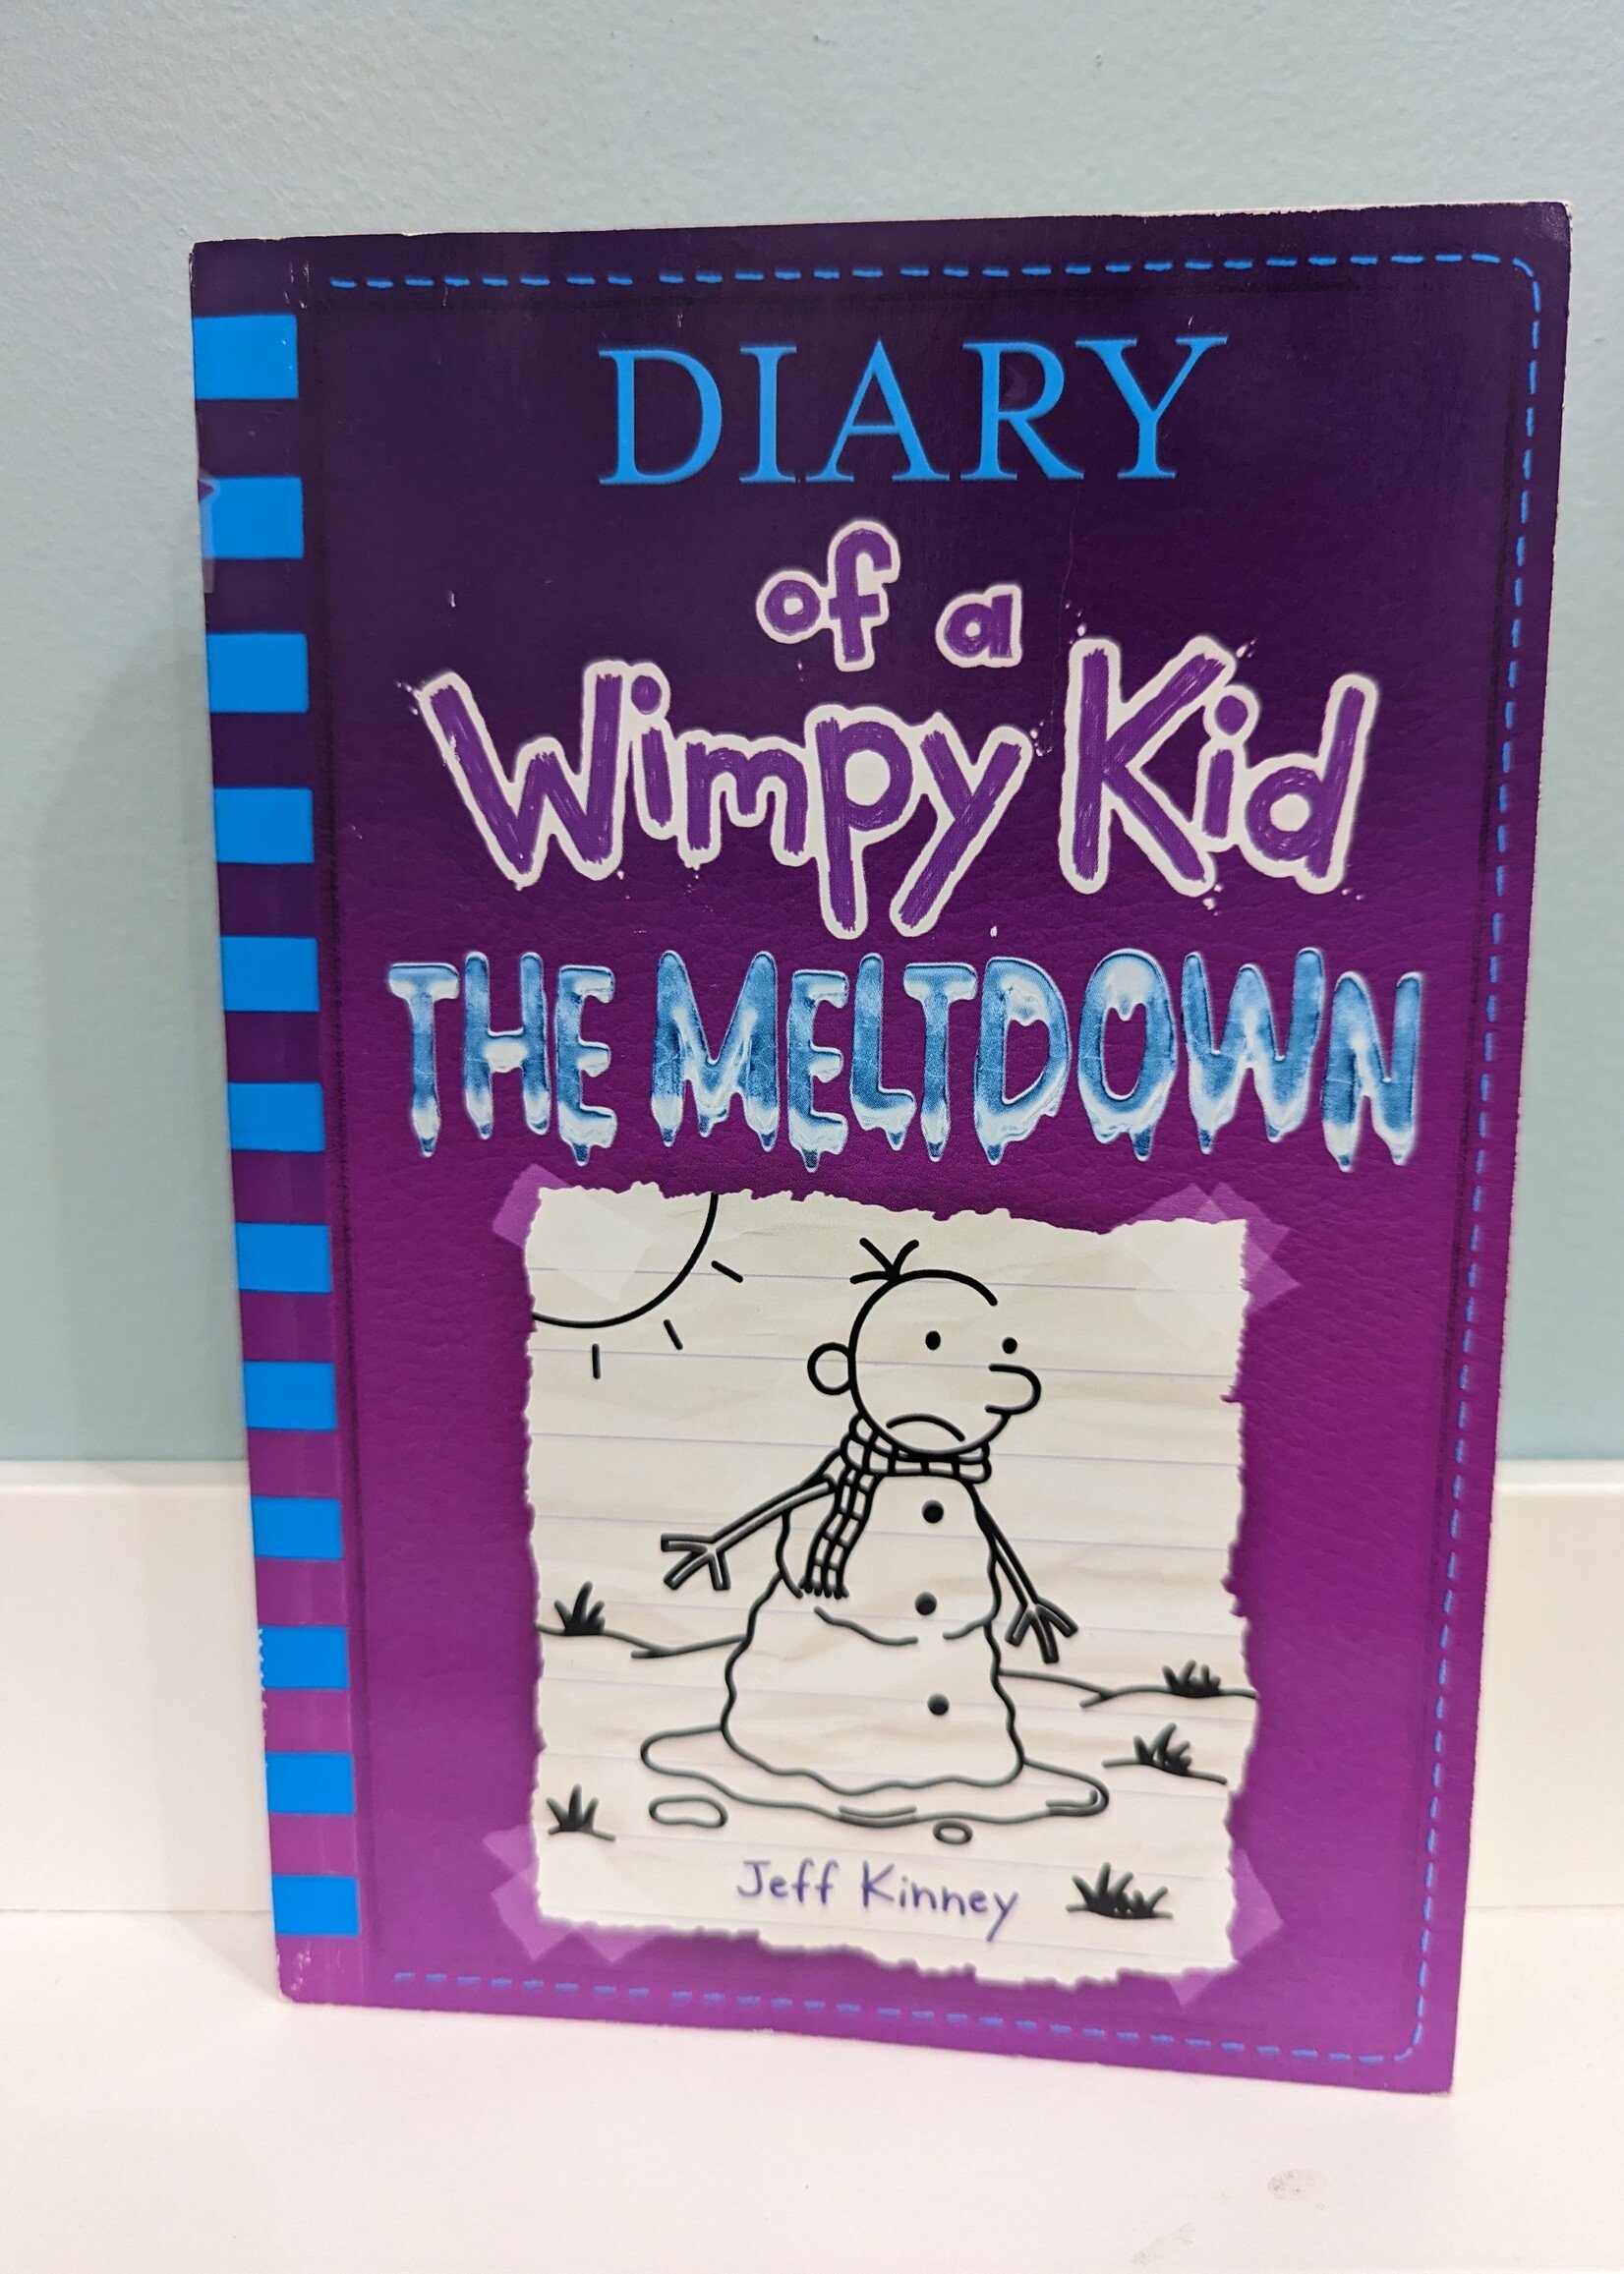 Abrams Books Diary of a Wimpy Kid: The Melt Down #13